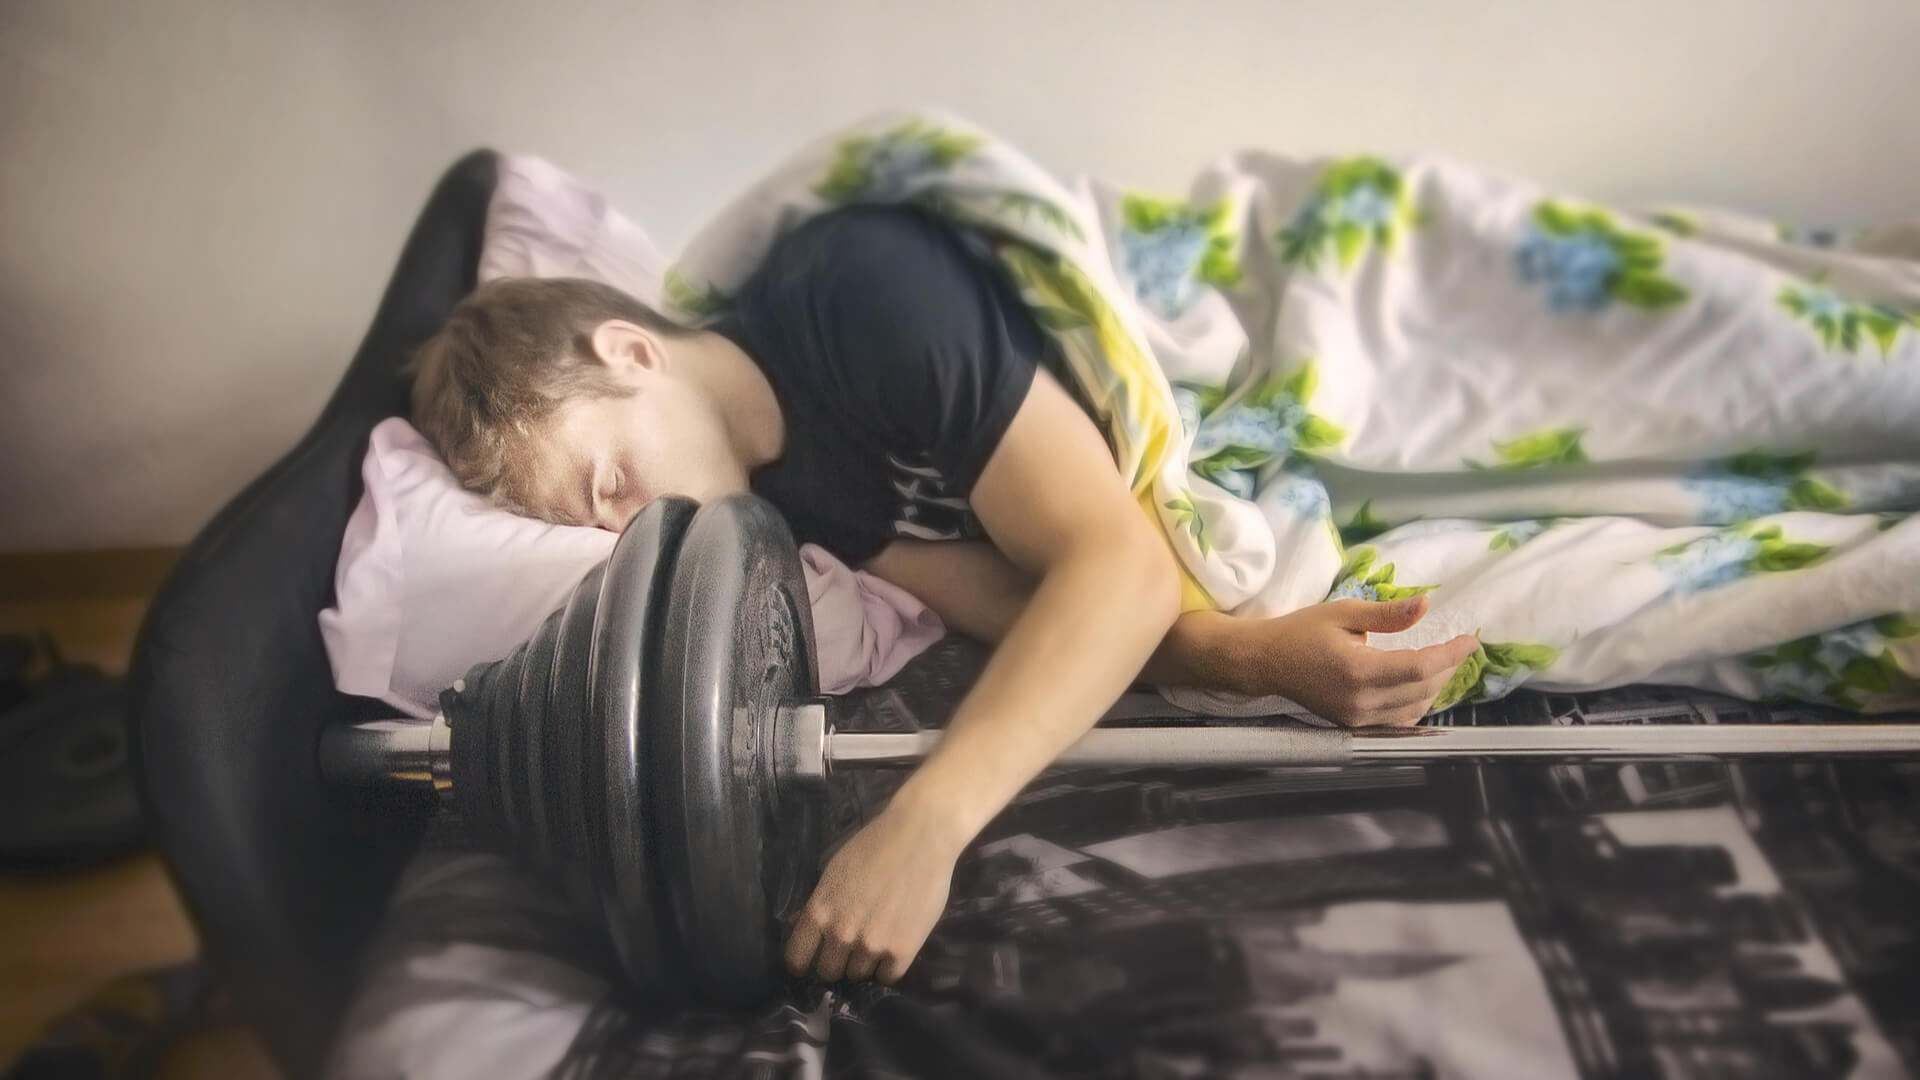 A bodybuilder guy sleeps with his athletic barbell after workout.